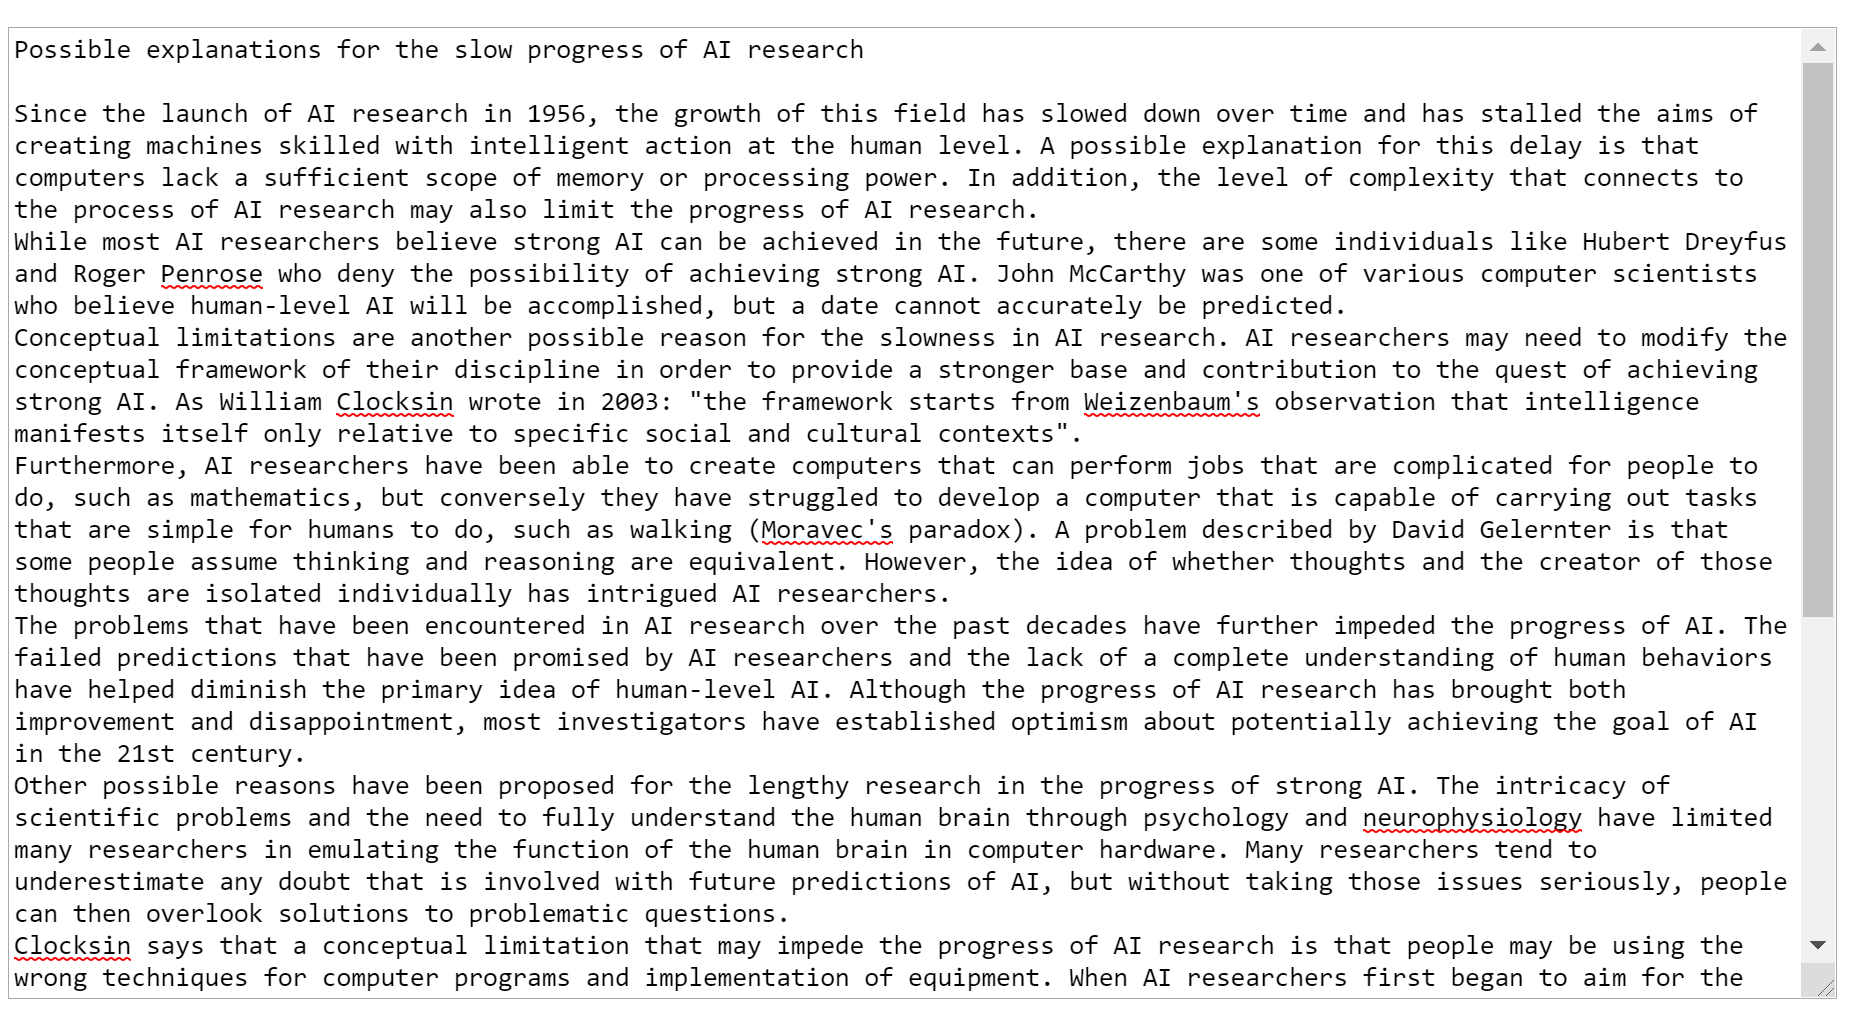 Possible explanations for the slow progress of AI research from Wikipedia